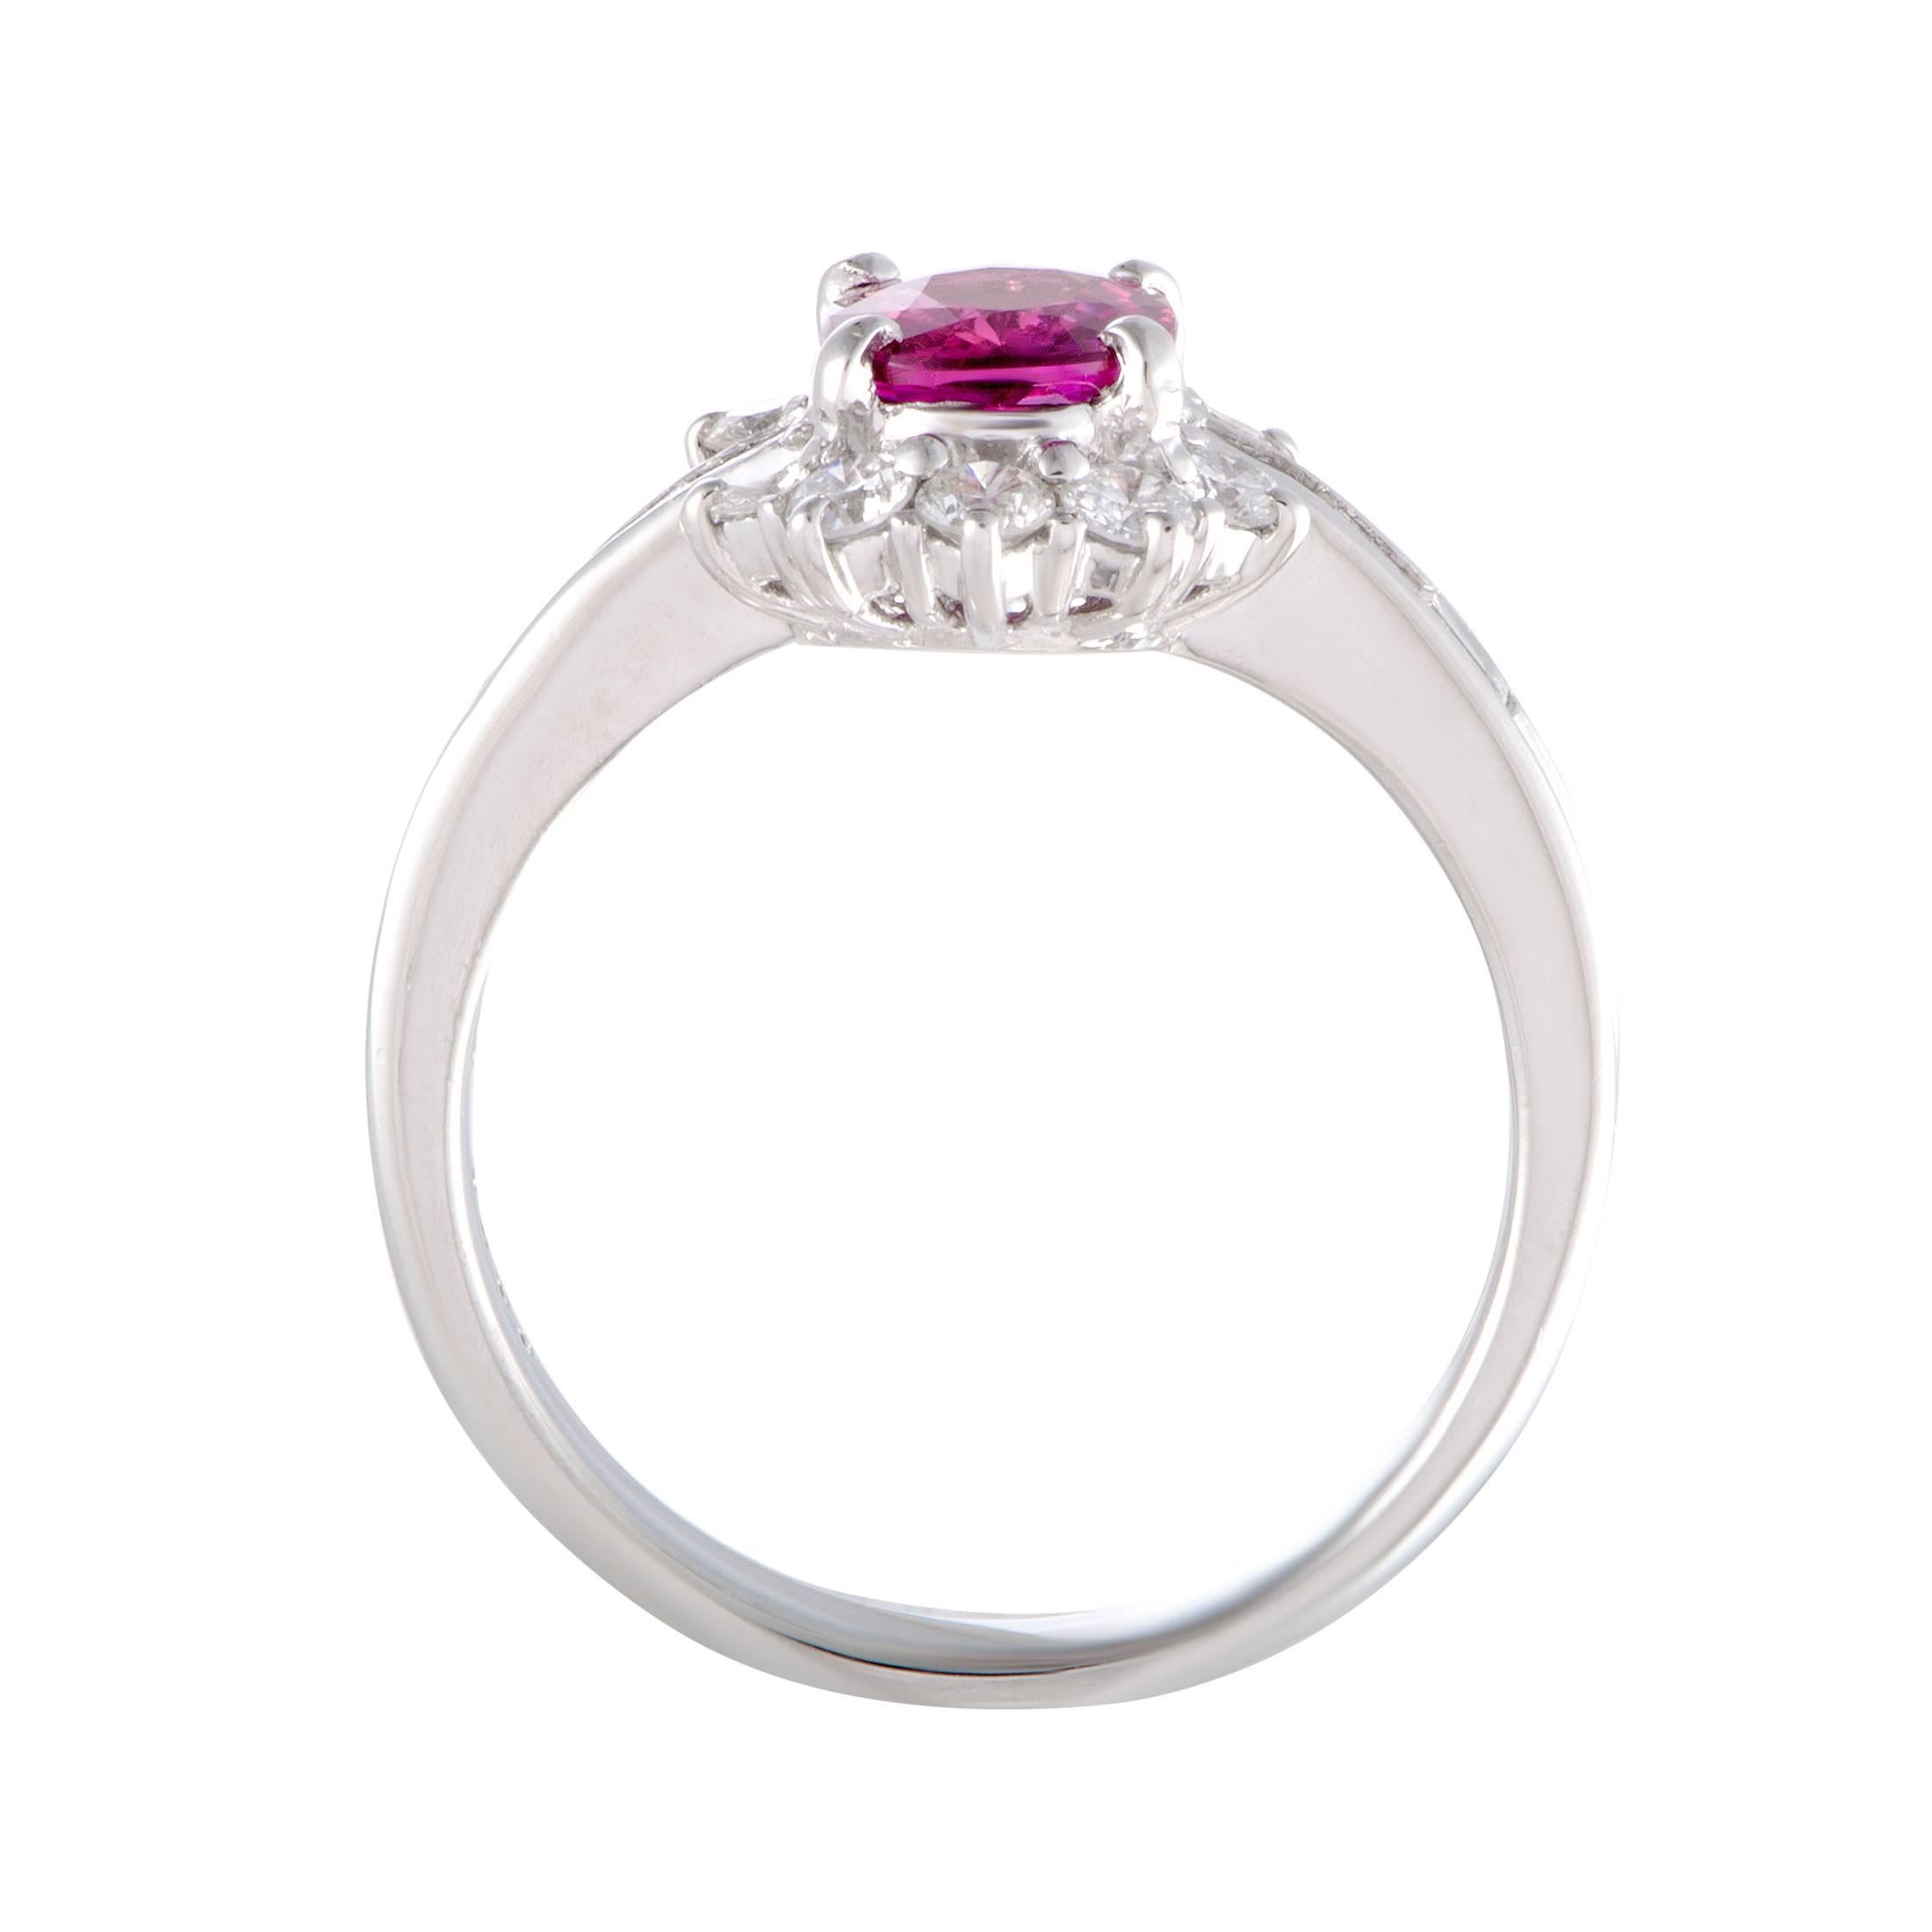 Gorgeously designed and beautifully decorated, this platinum ring boasts an exceptionally prestigious and fashionable appeal. The elegant ring is adorned with 0.53ct of stunning diamonds around a gorgeous ruby, weighing 1.01ct, that add glitz and